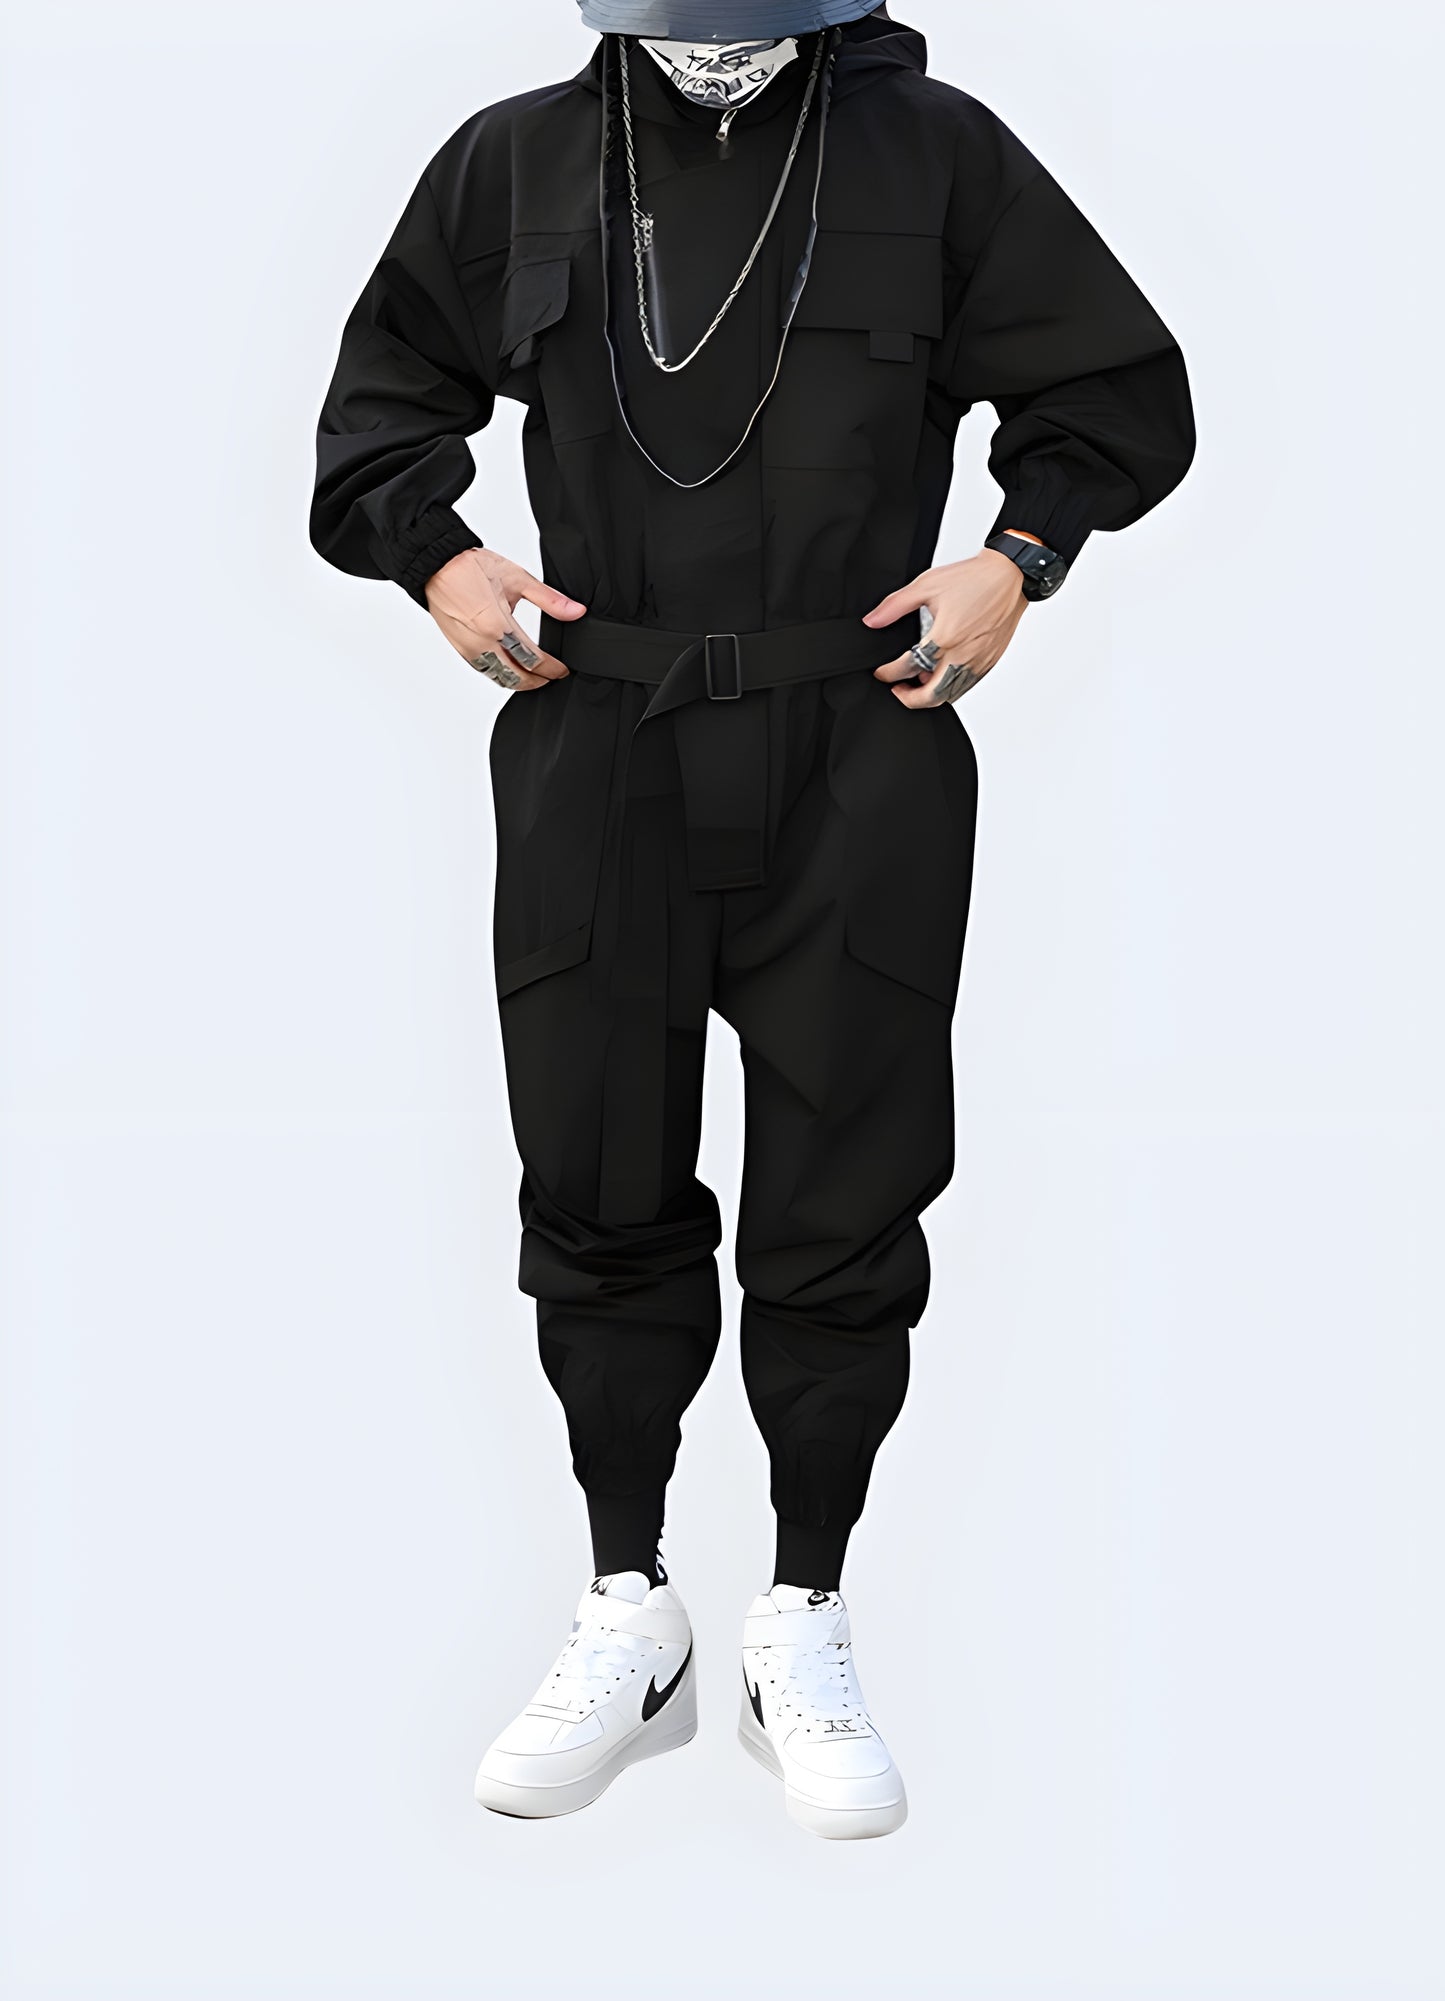 Techwear jumpsuit features multiple chest, thigh, and buttock cargo pockets.